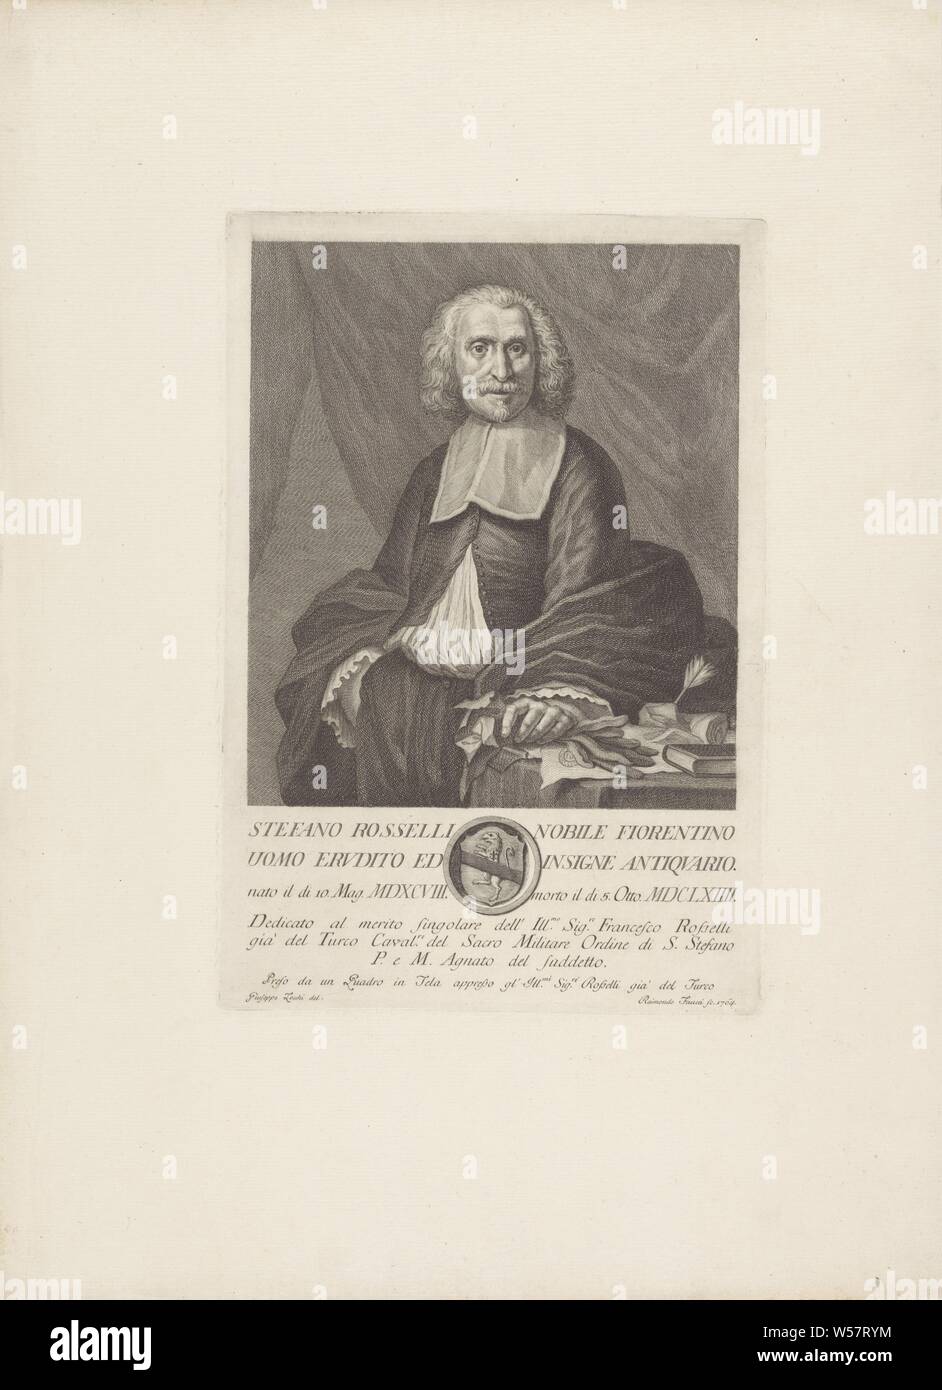 Portrait of Stefano Rosselli Portraits of famous Italians with a coat of arms in a lower margin (series title), historical persons, Stefano Rosselli, Raimondo Faucci (mentioned on object), Italy, 1764, paper, engraving, h 294 mm × w 201 mm Stock Photo